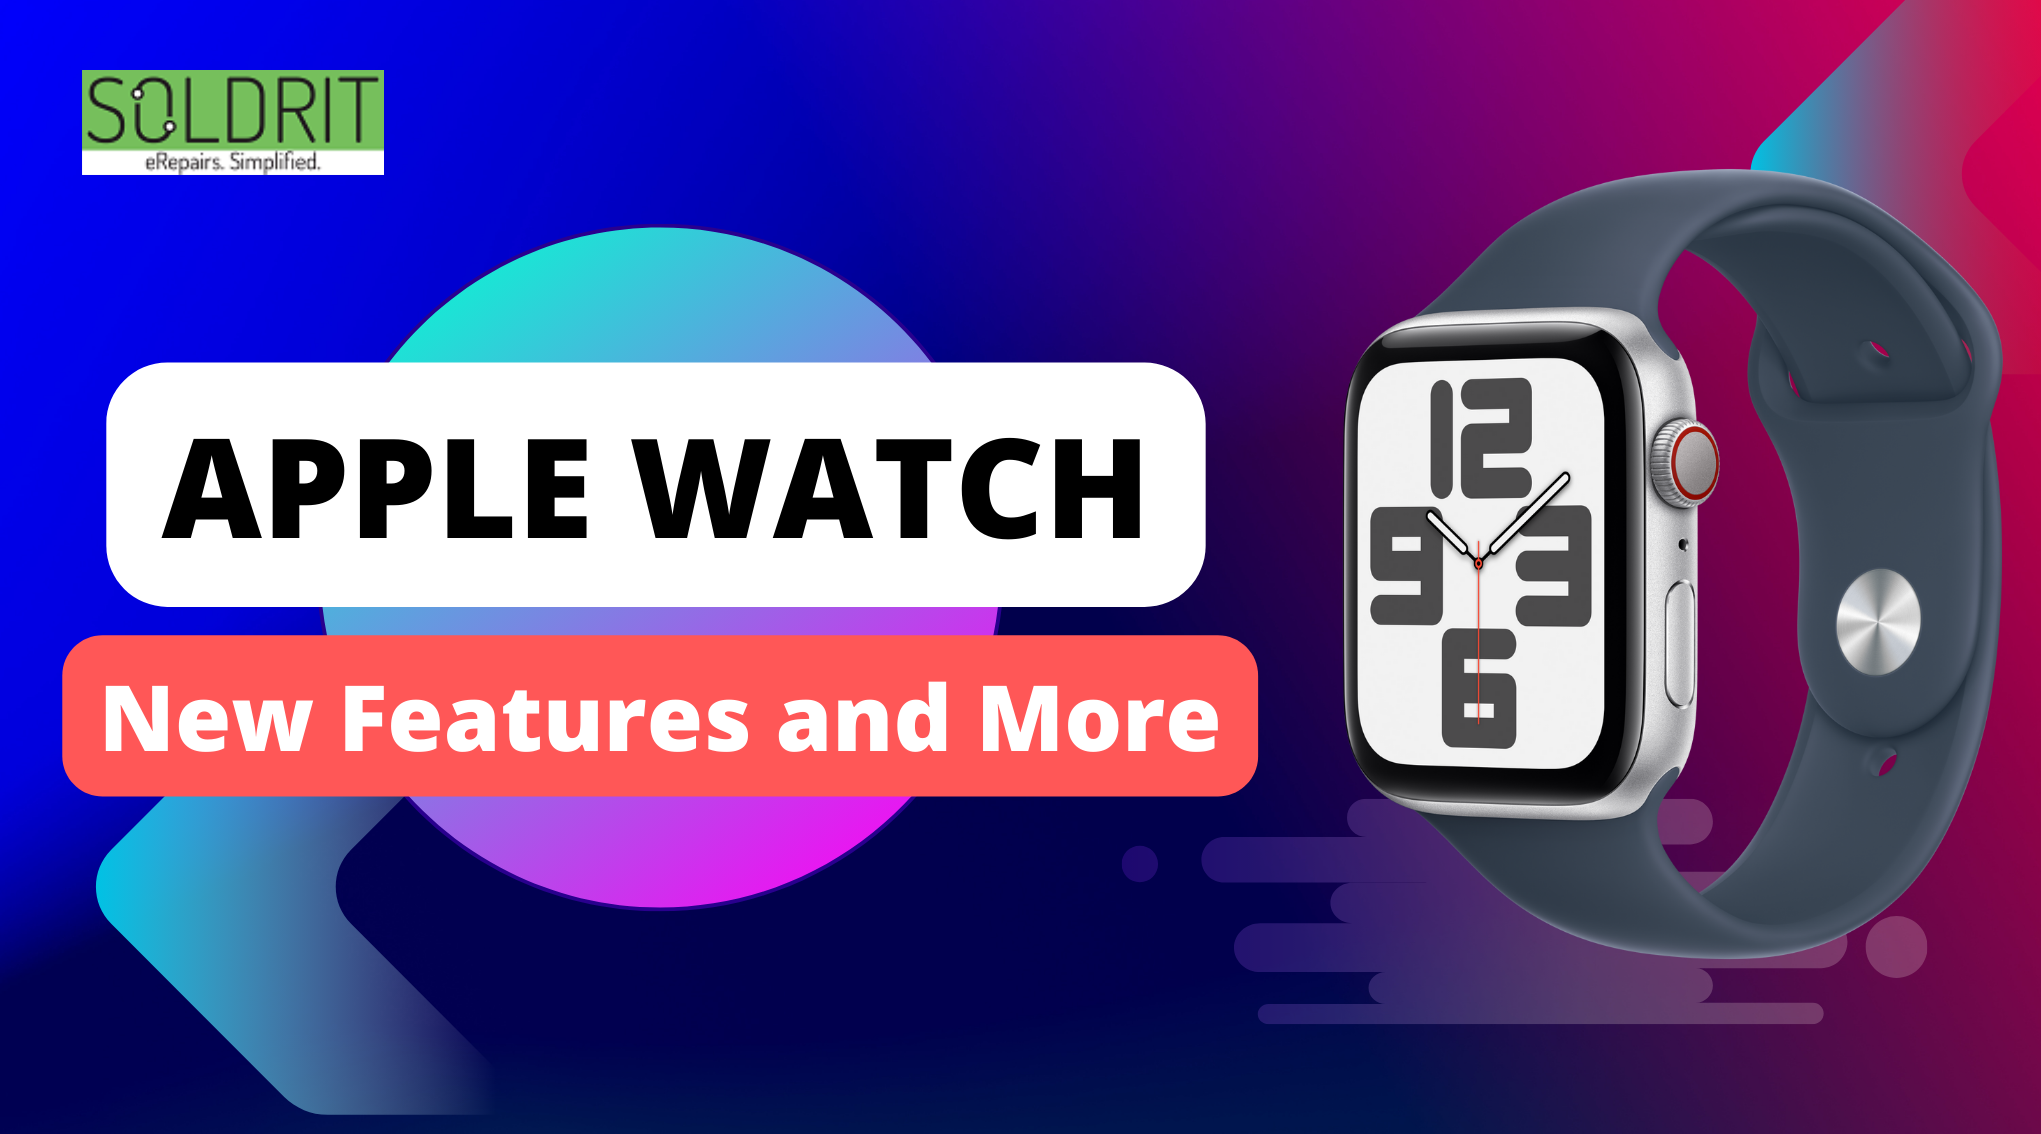 Apple iWatch in New Features and More